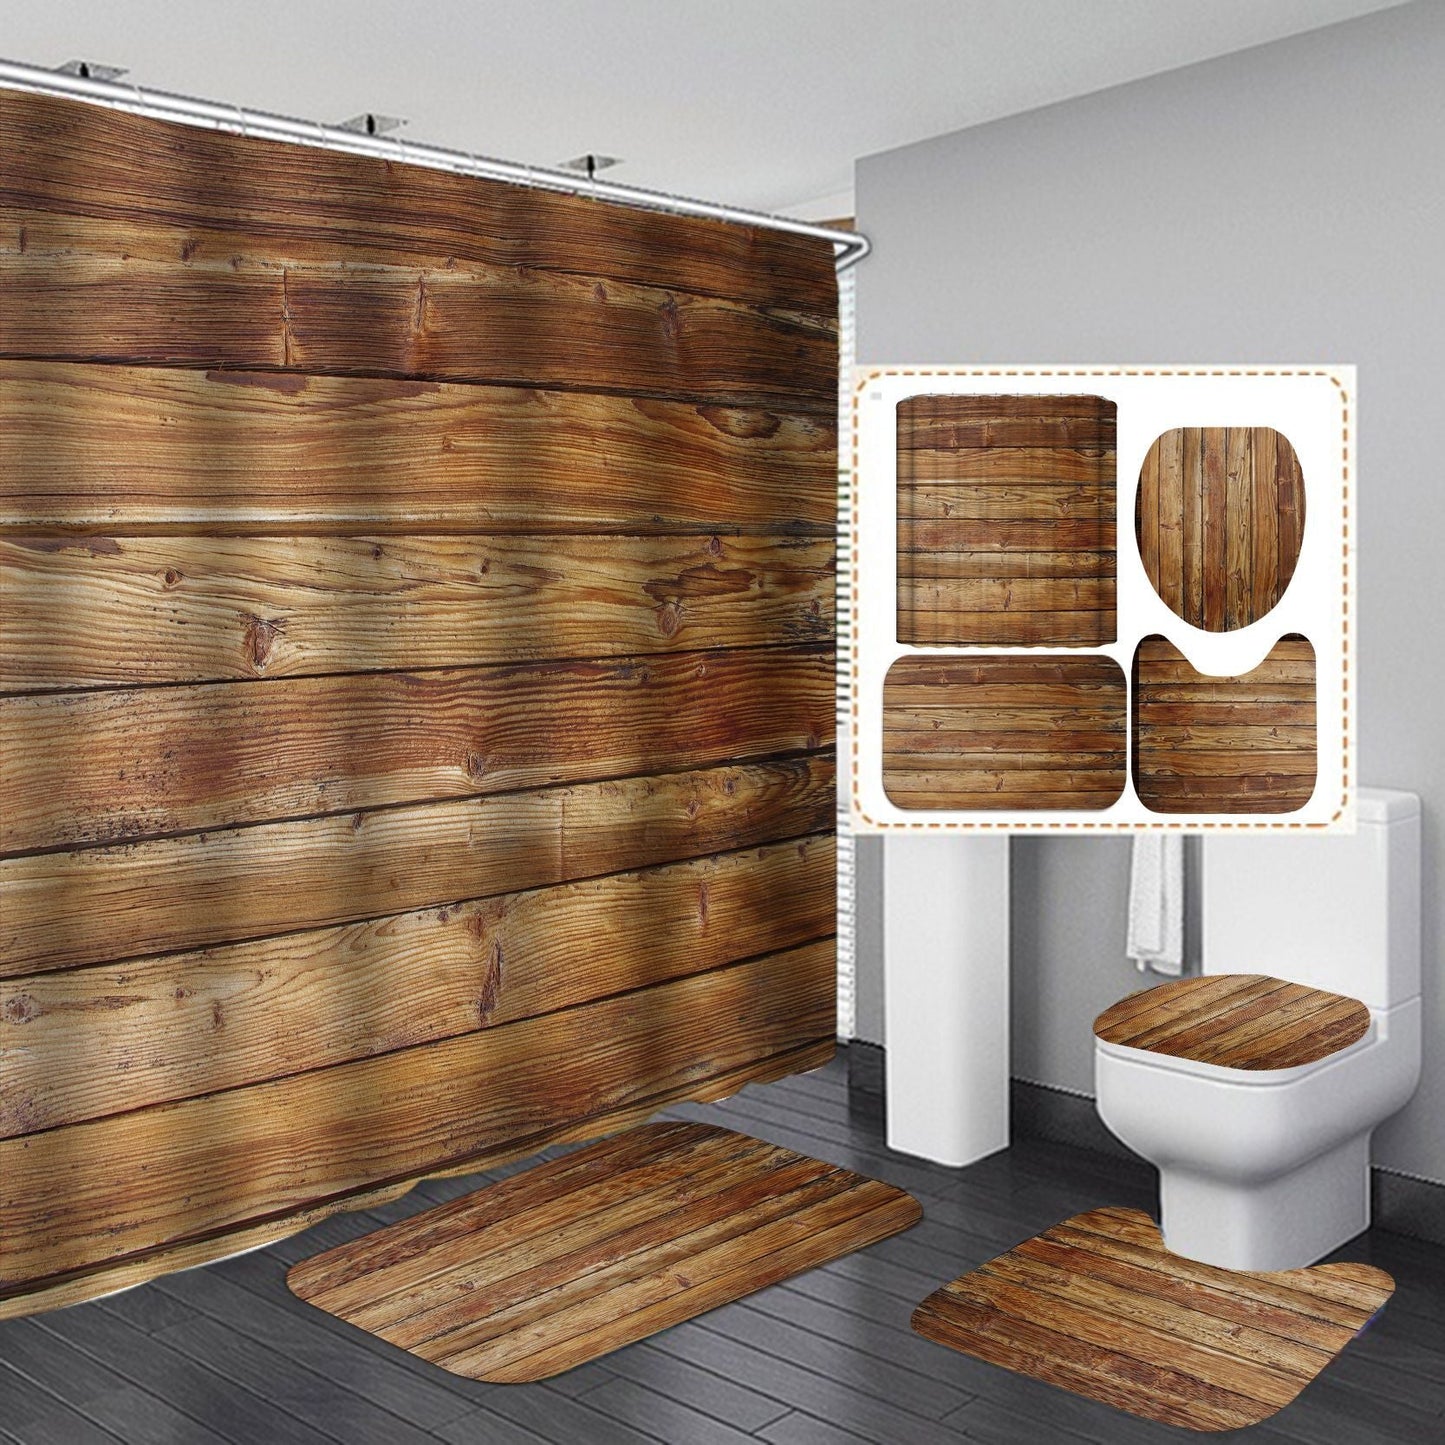 Vintage Wooden Door Design Shower Curtain Bathroom SetsNon-Slip Toilet Lid Cover-Shower Curtain-180×180cm Shower Curtain Only-3-Free Shipping at meselling99